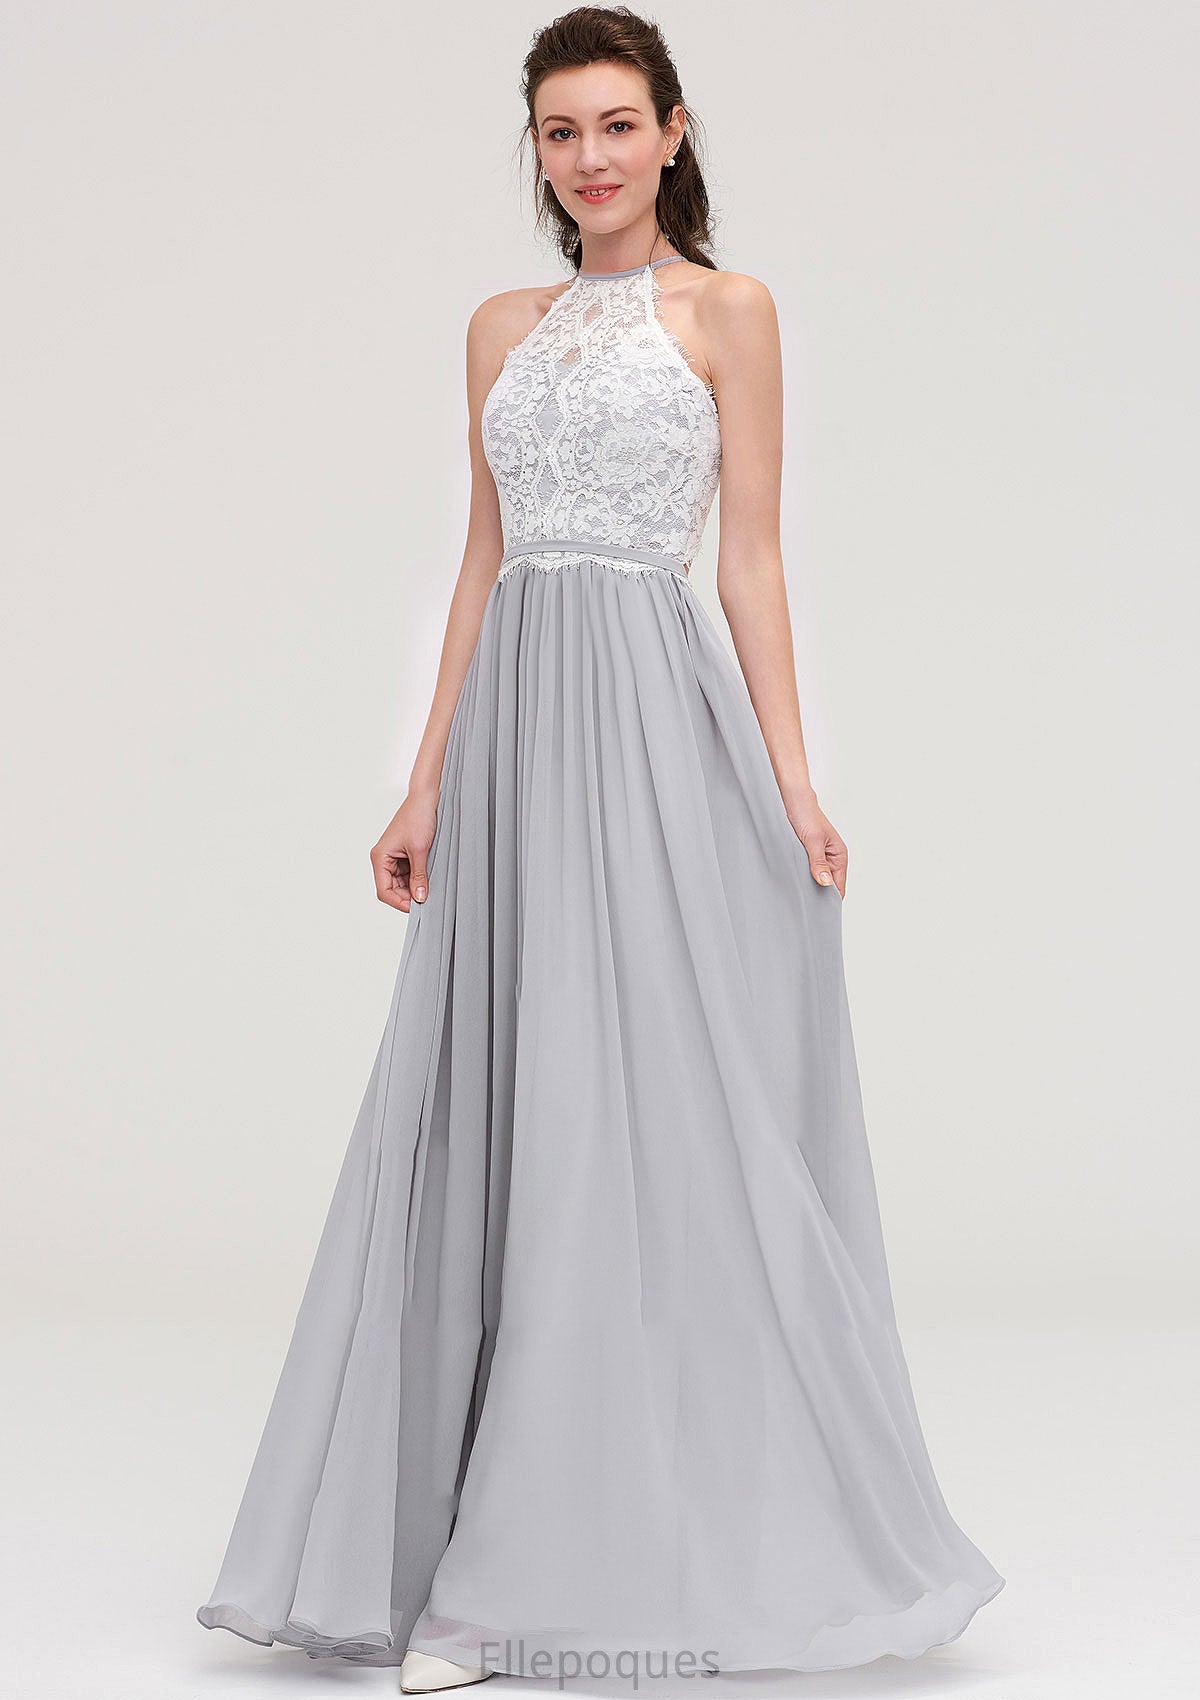 Sleeveless Scoop Neck A-line/Princess Chiffon Long/Floor-Length Bridesmaid Dresseses With Lace Kelsie HOP0025497